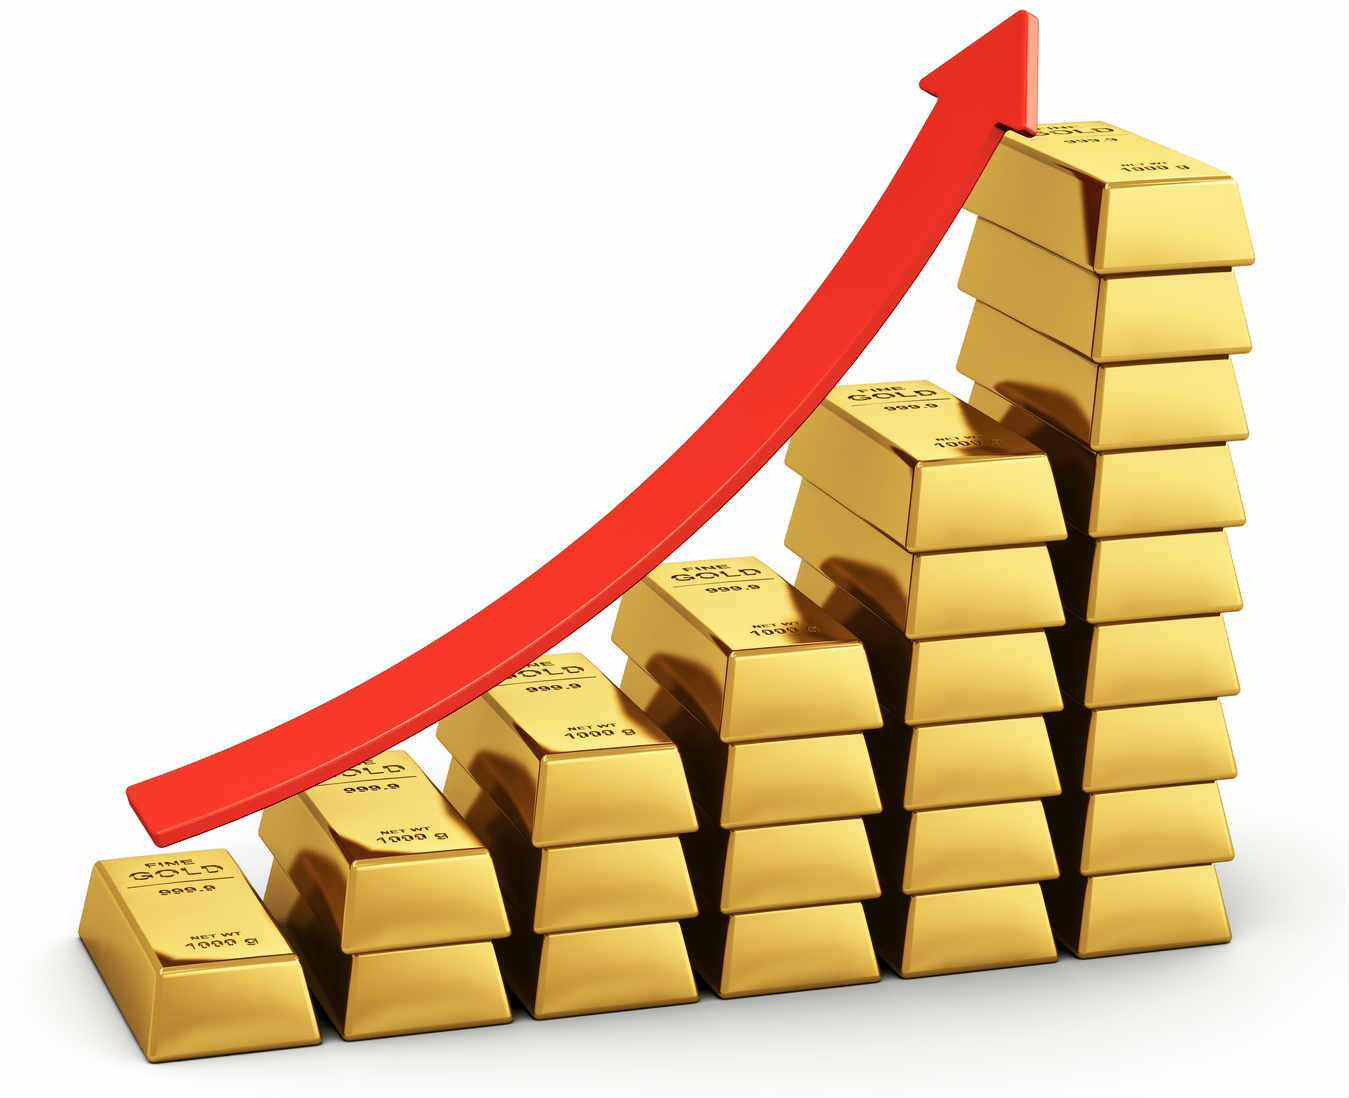 Gold price increase by Rs 1,500 per tola